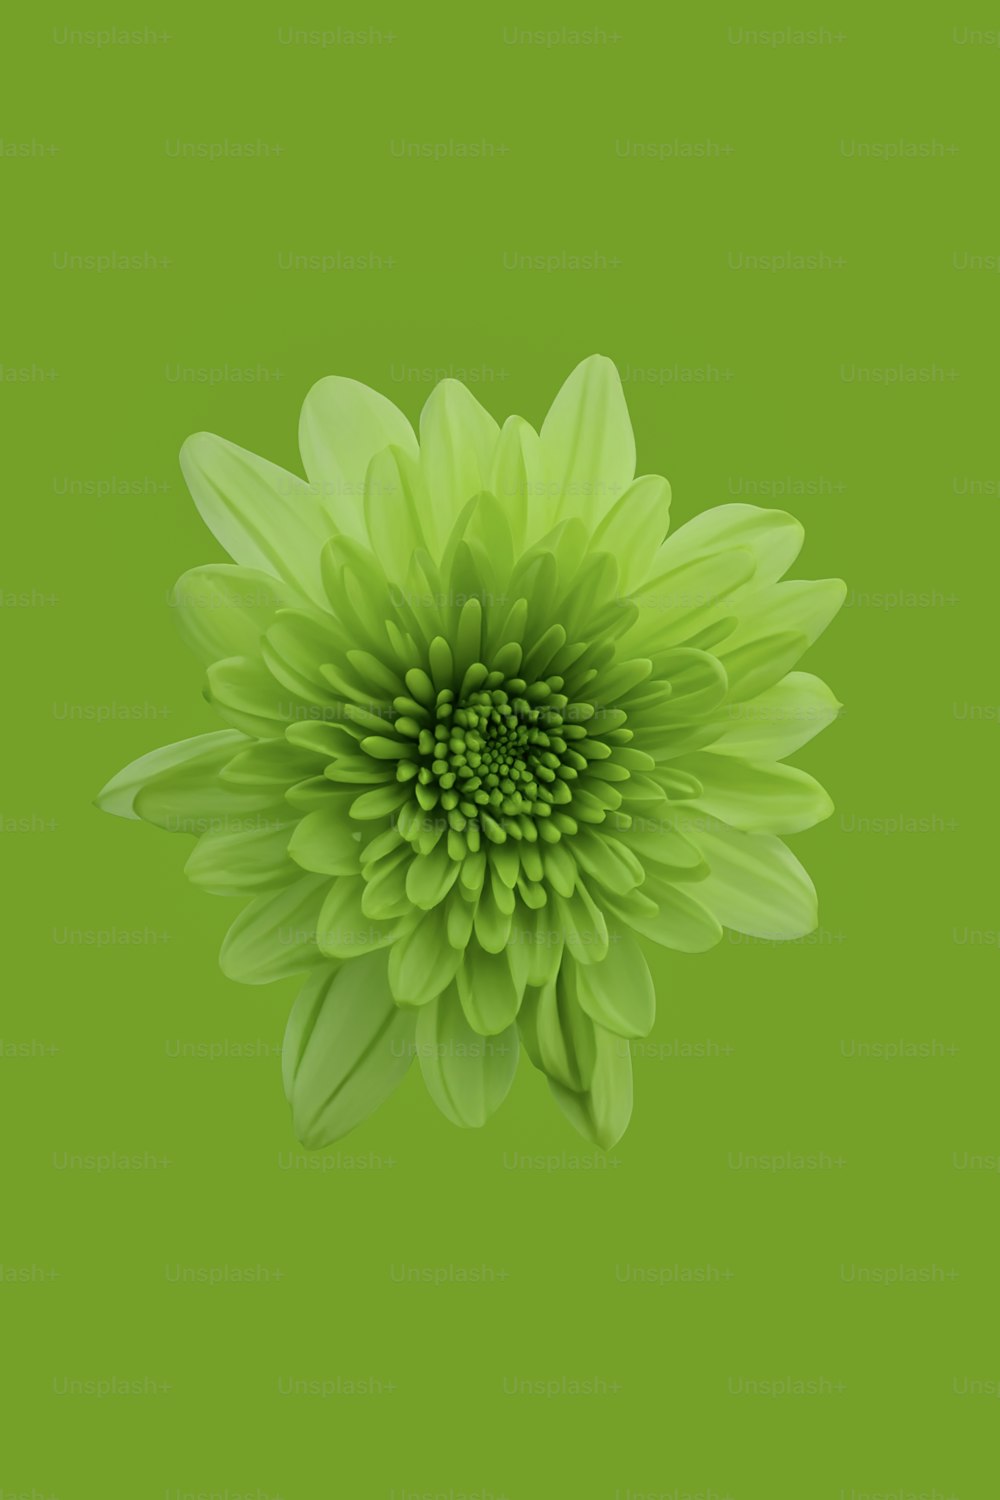 a large green flower on a green background